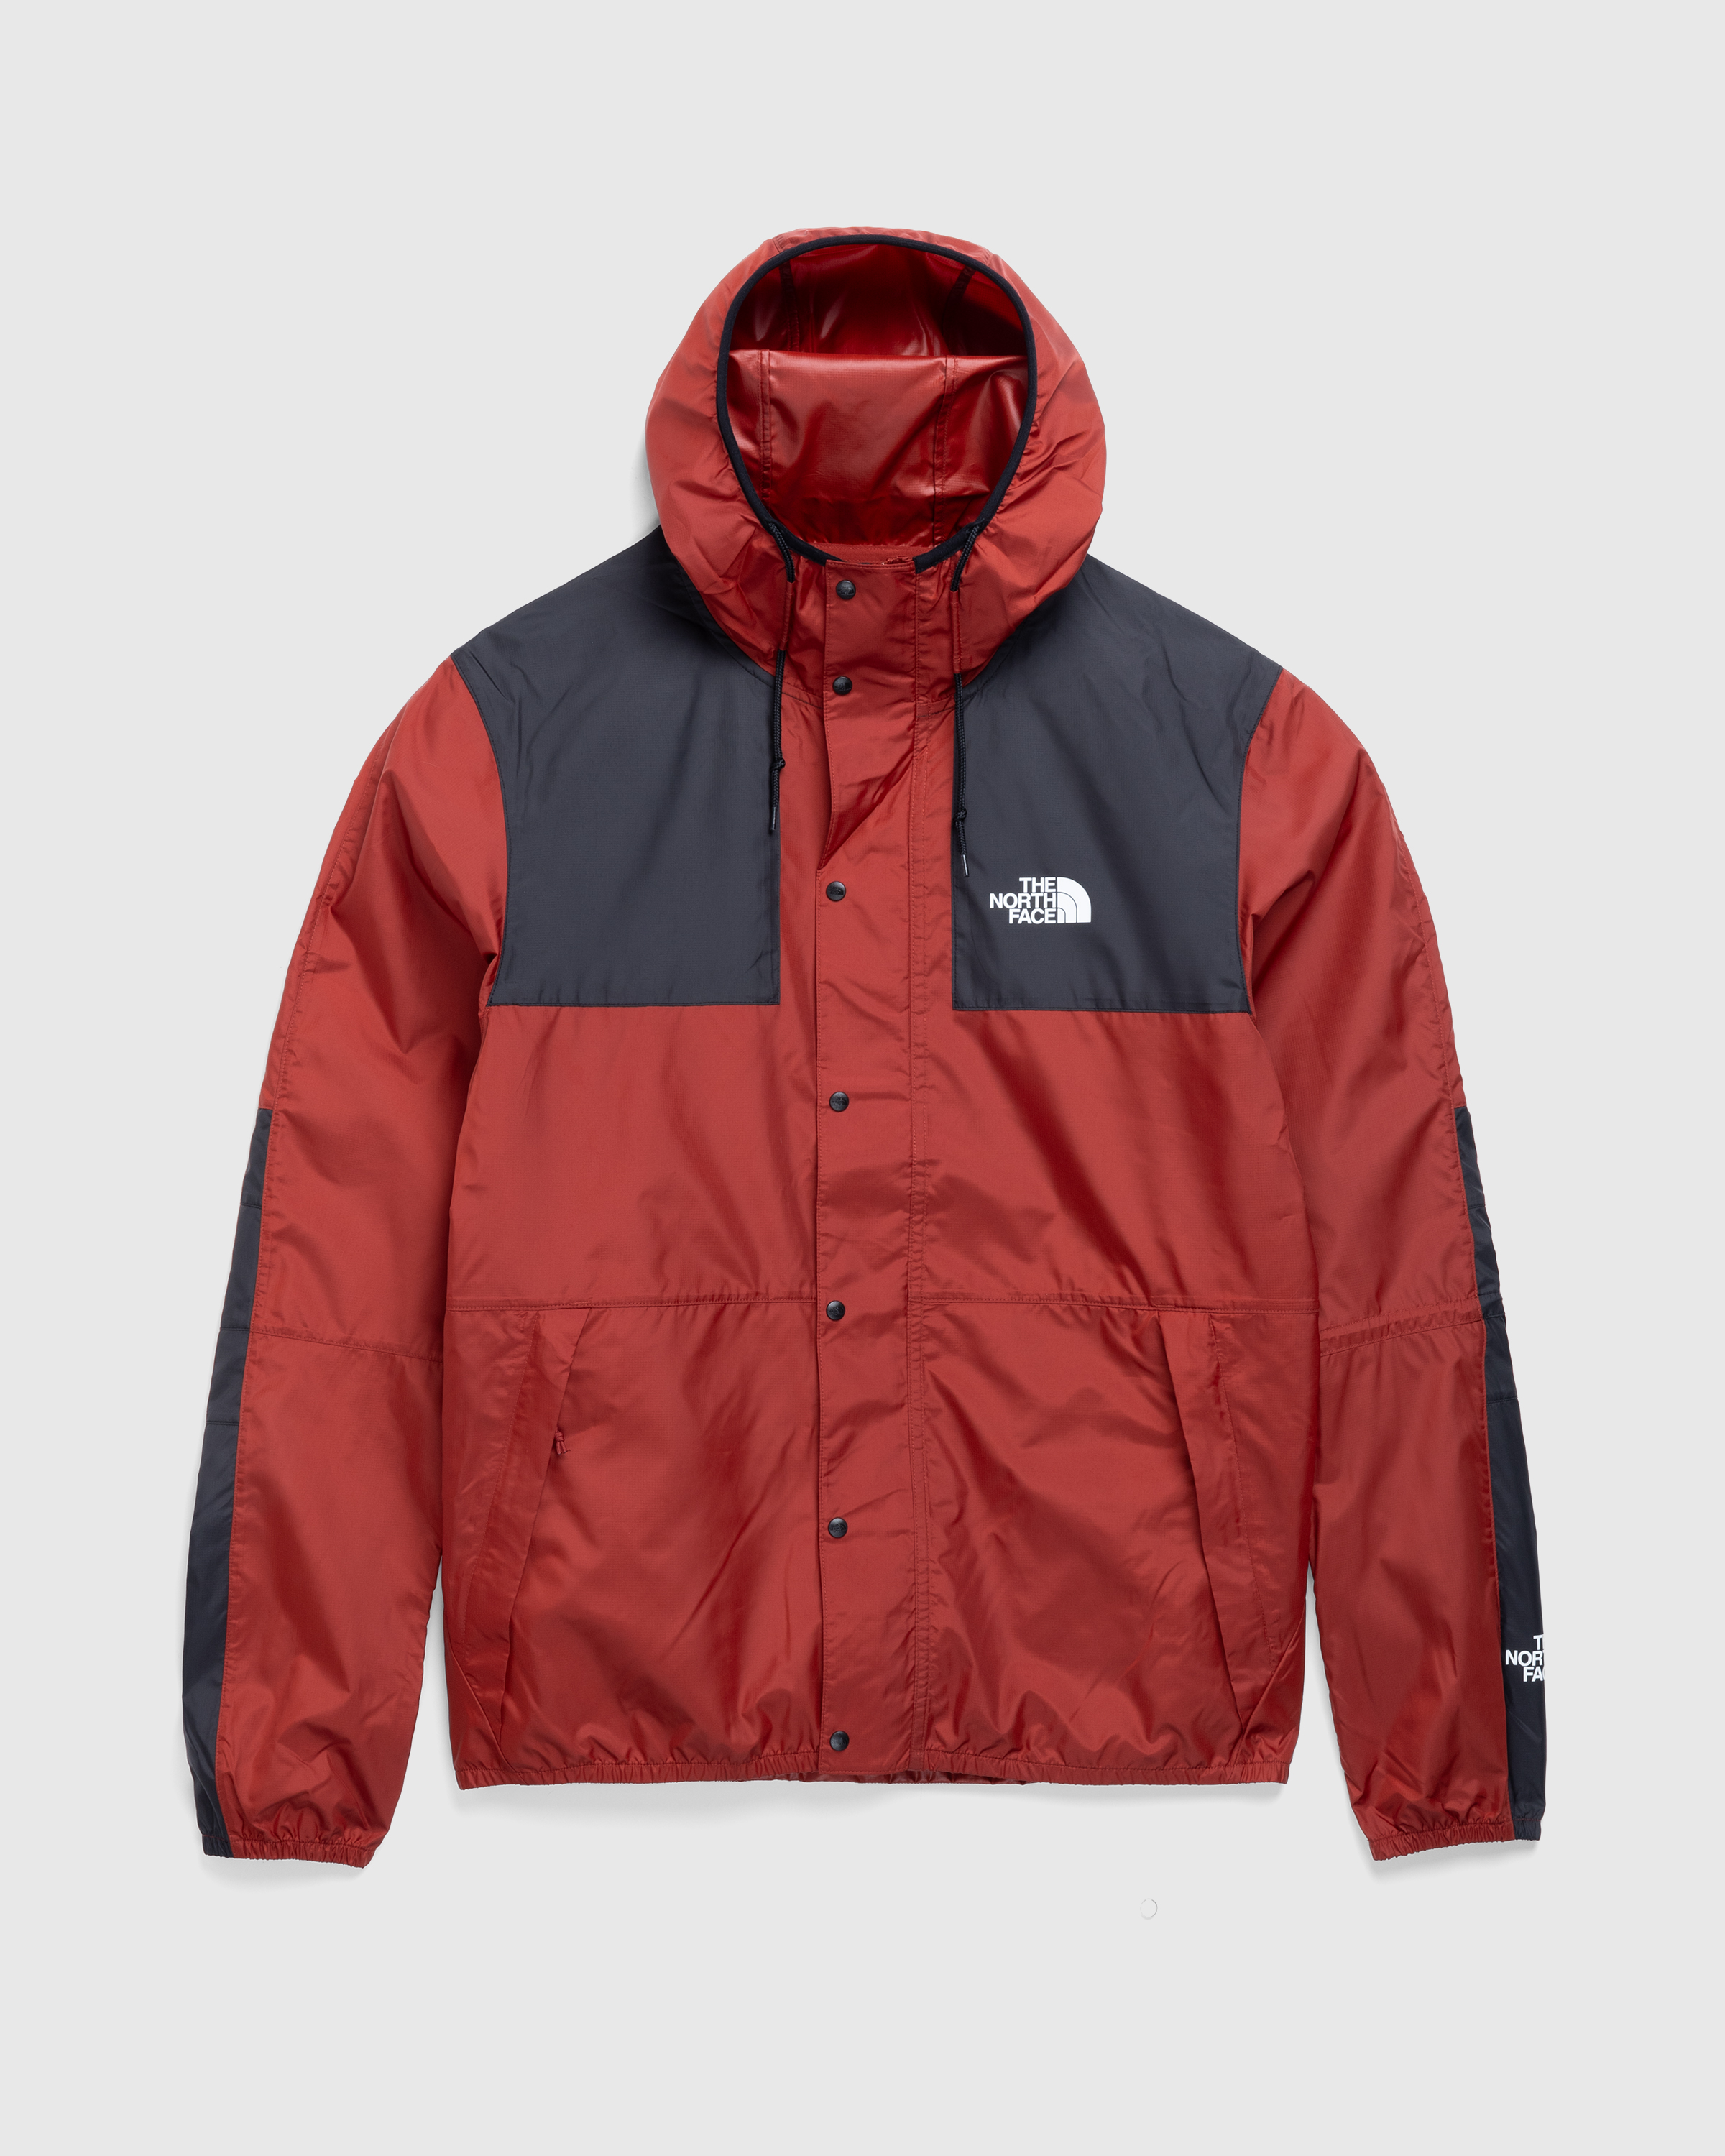 The North Face – Seasonal Mountain Jacket Iron Red - Jackets - Red - Image 1